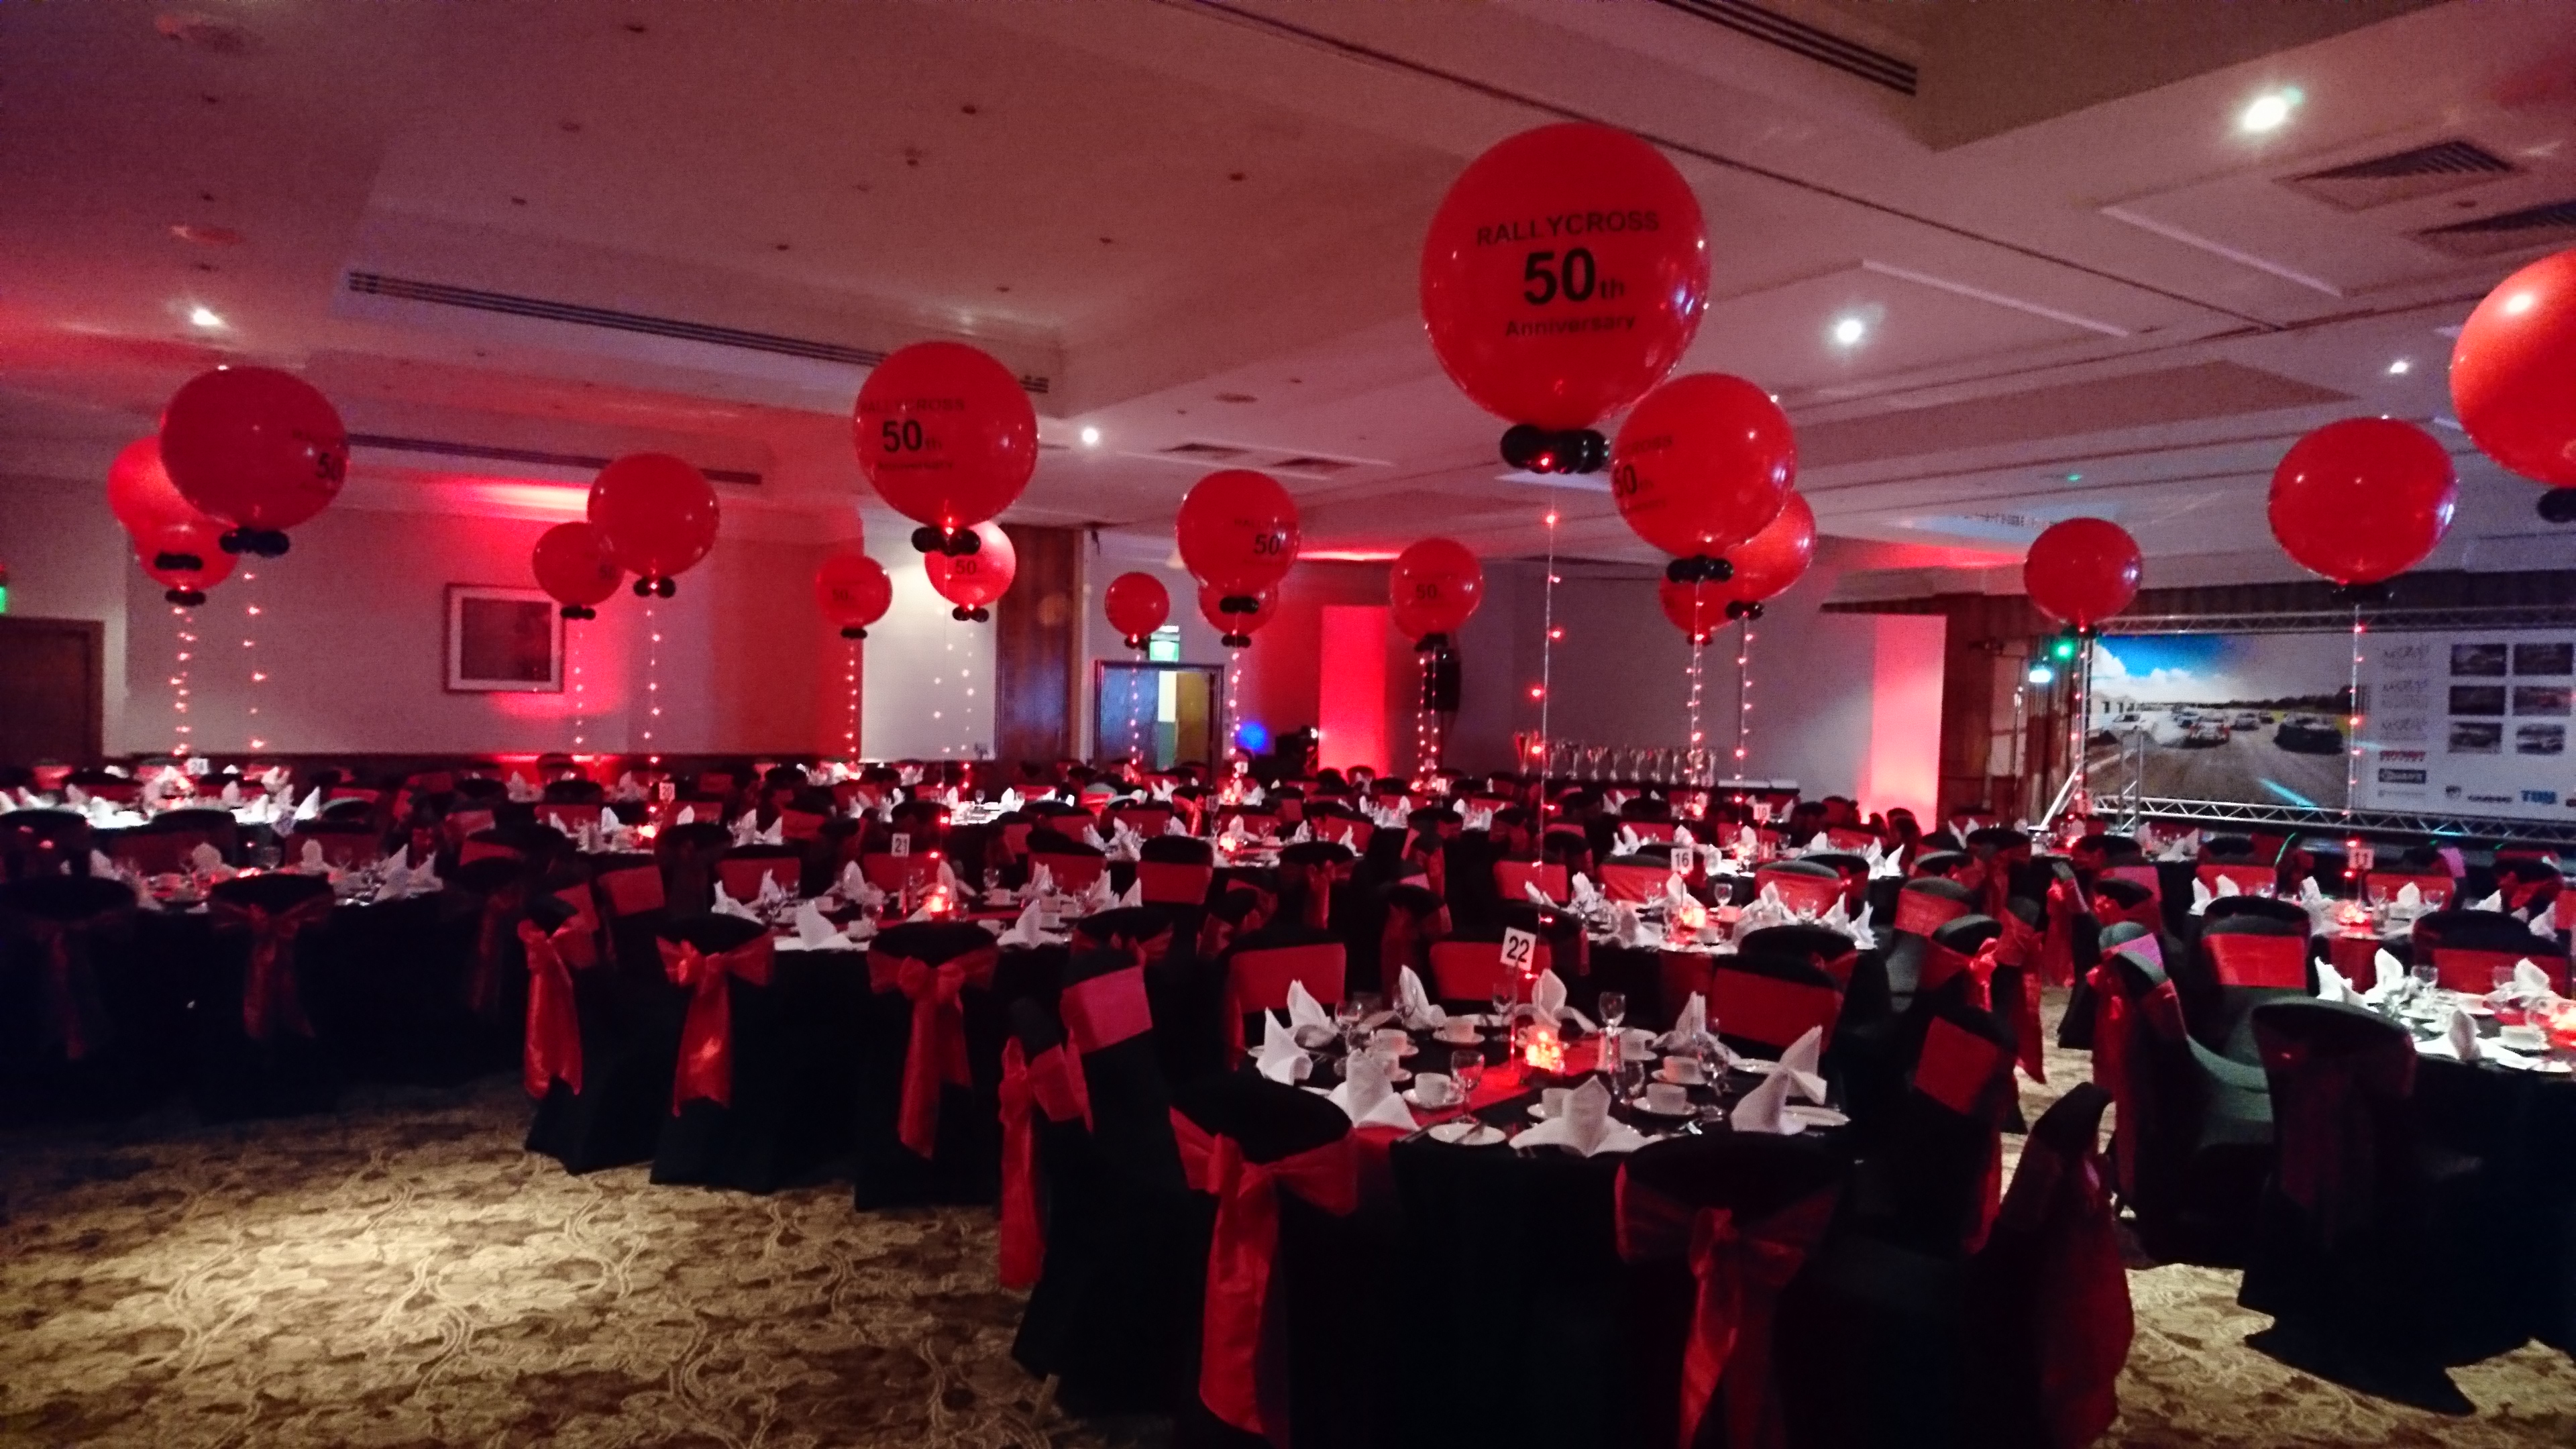 You are currently viewing Championship at Double Tree Hilton Walsgrave. Large 3 foot Balloons with logos, led lights and weights